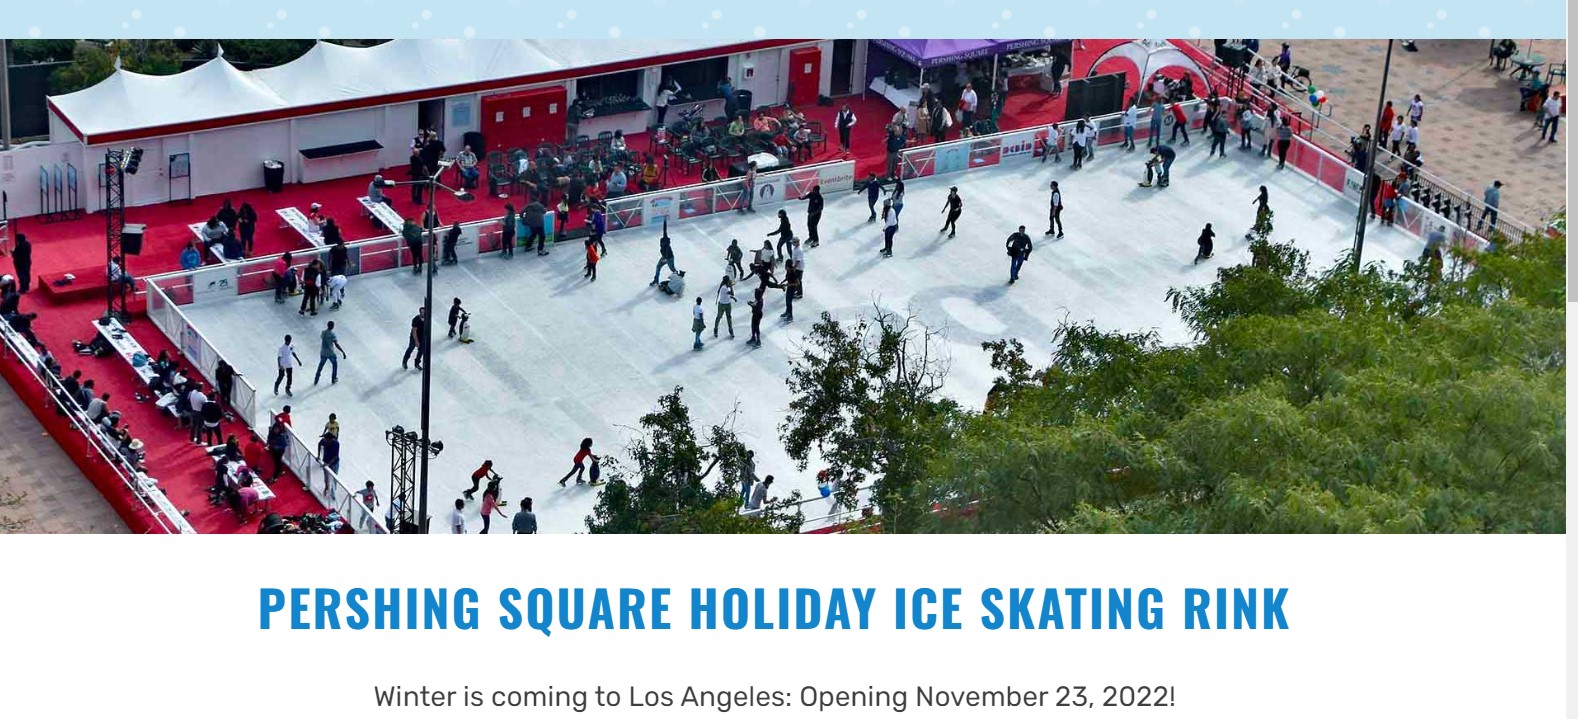 Holiday Ice Rink in Pershing Square 26 NOV 2022